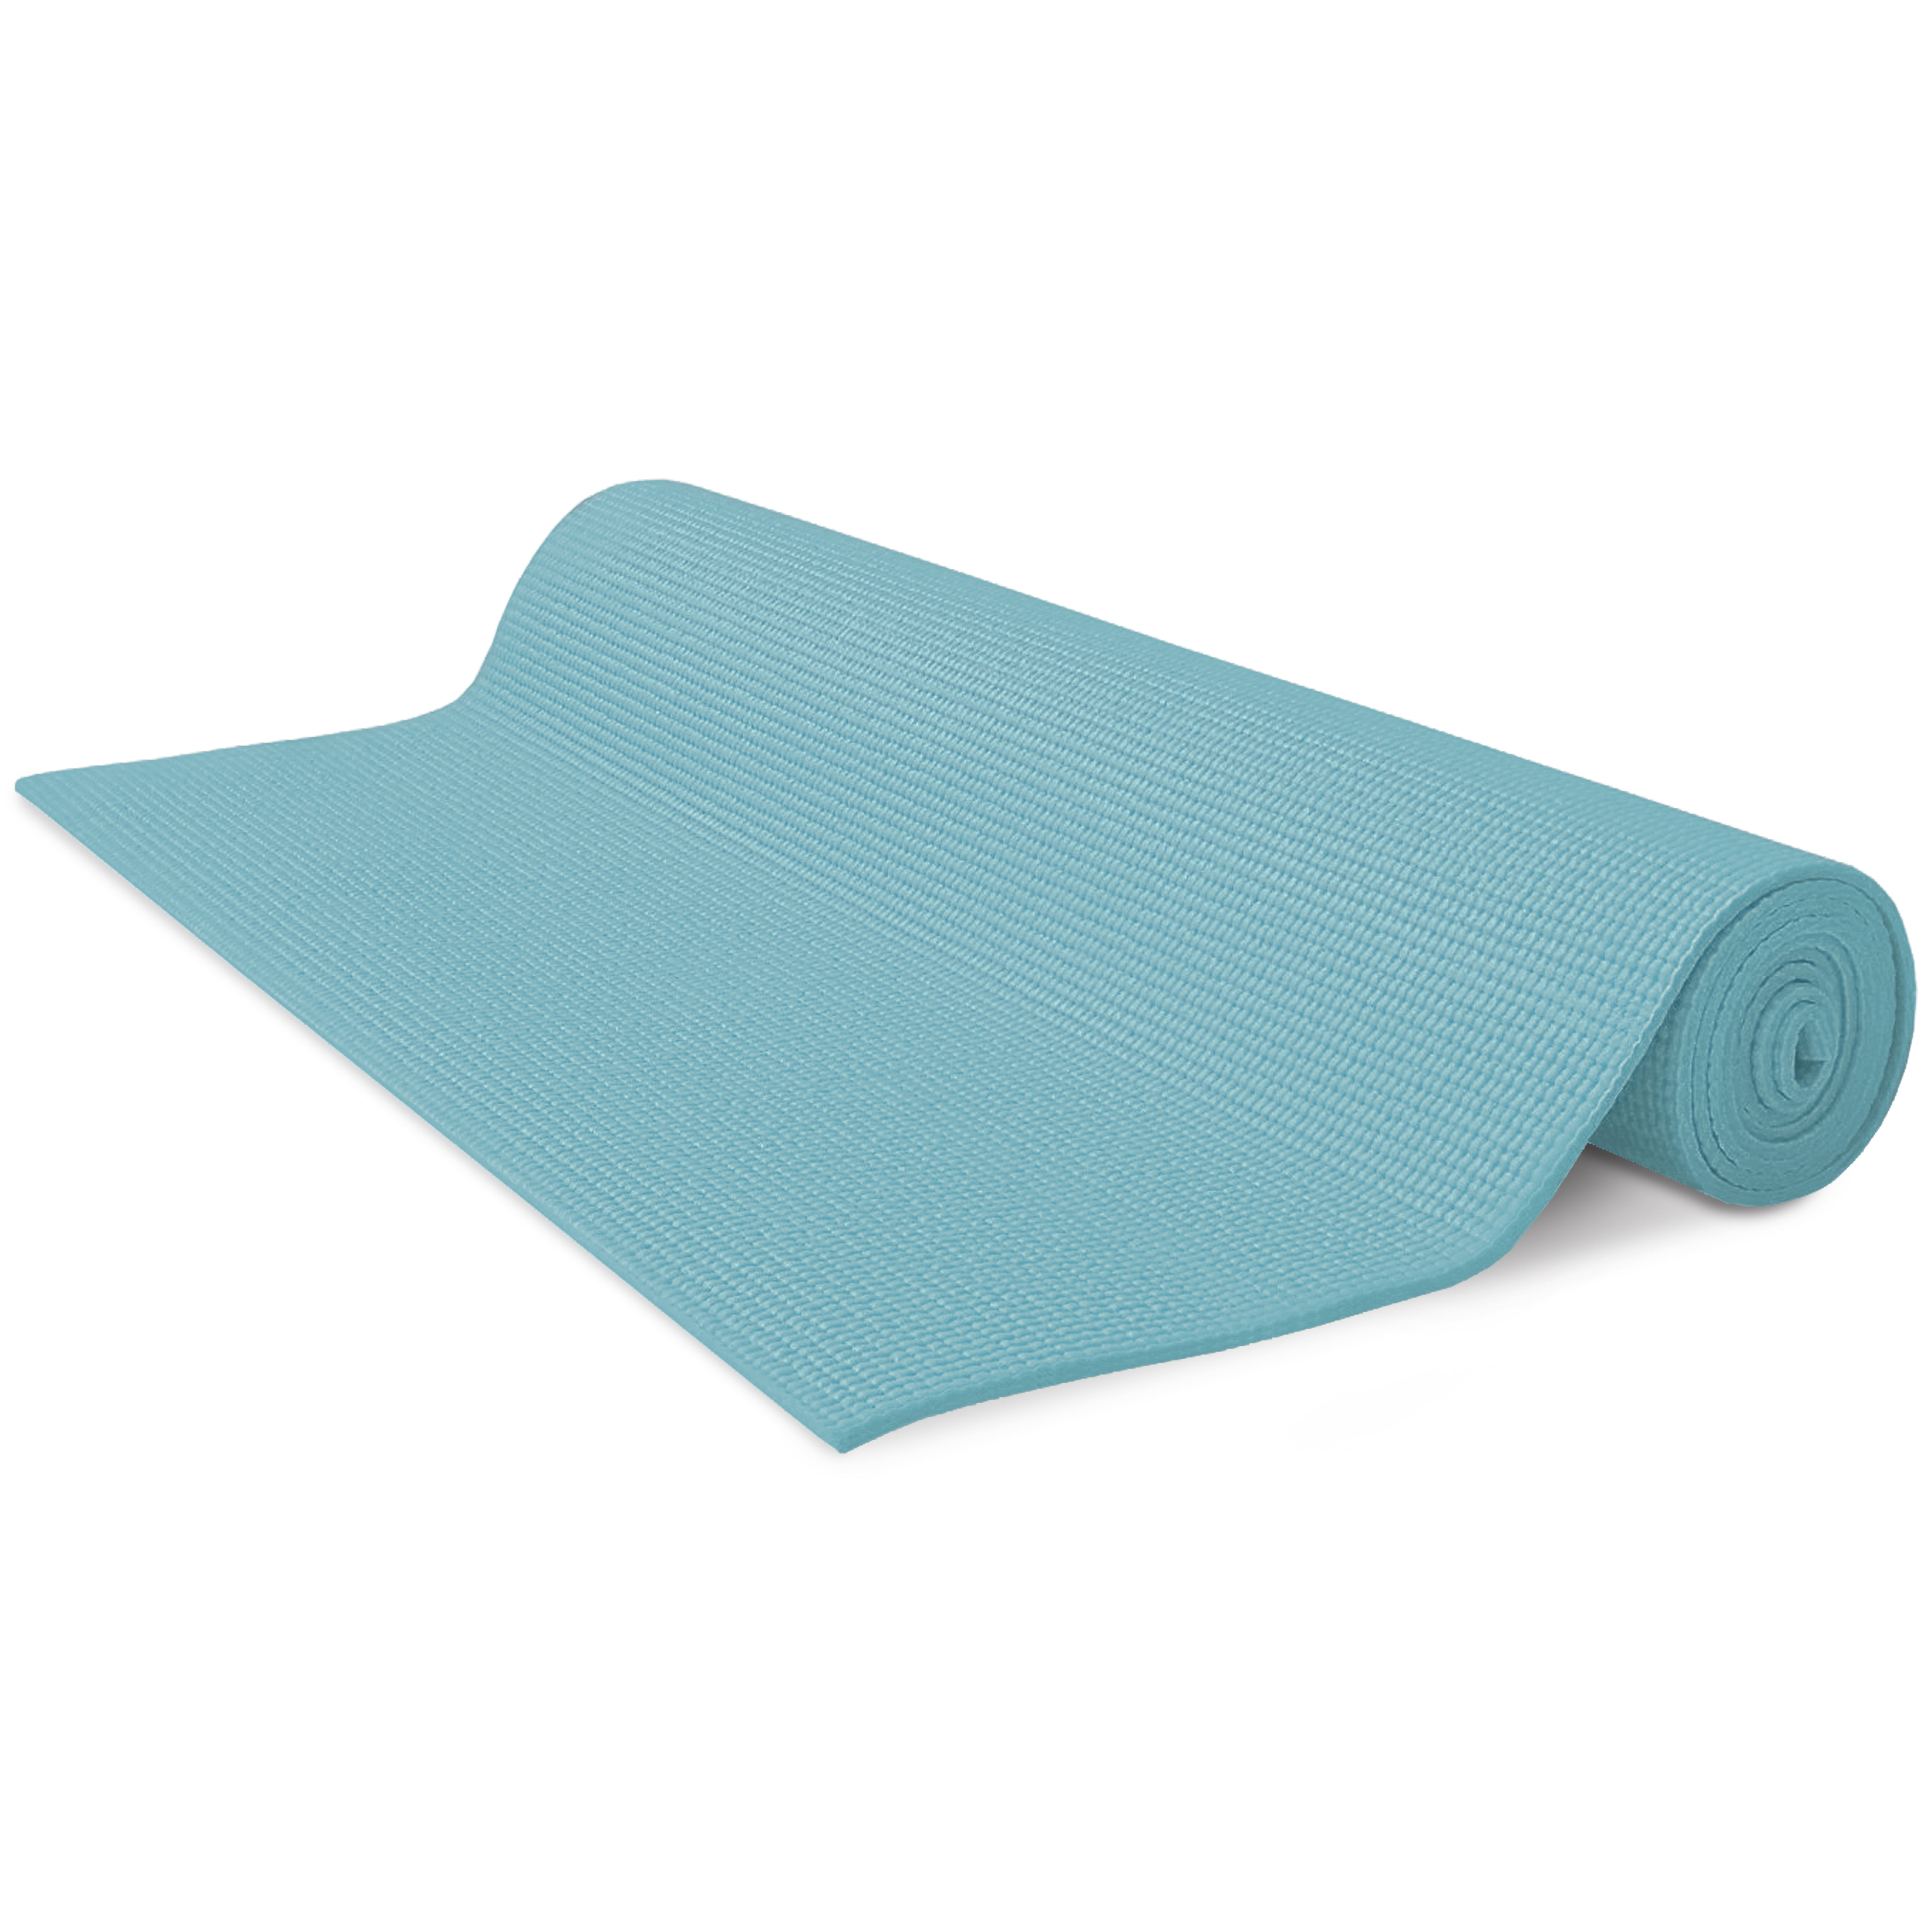 Bean Products Kid Size Yoga Mat 1/8 Thick Non-Toxic 60 Long SGS Certified Non-Skid No Phthalates or Latex 24 Wide Premium Quality 